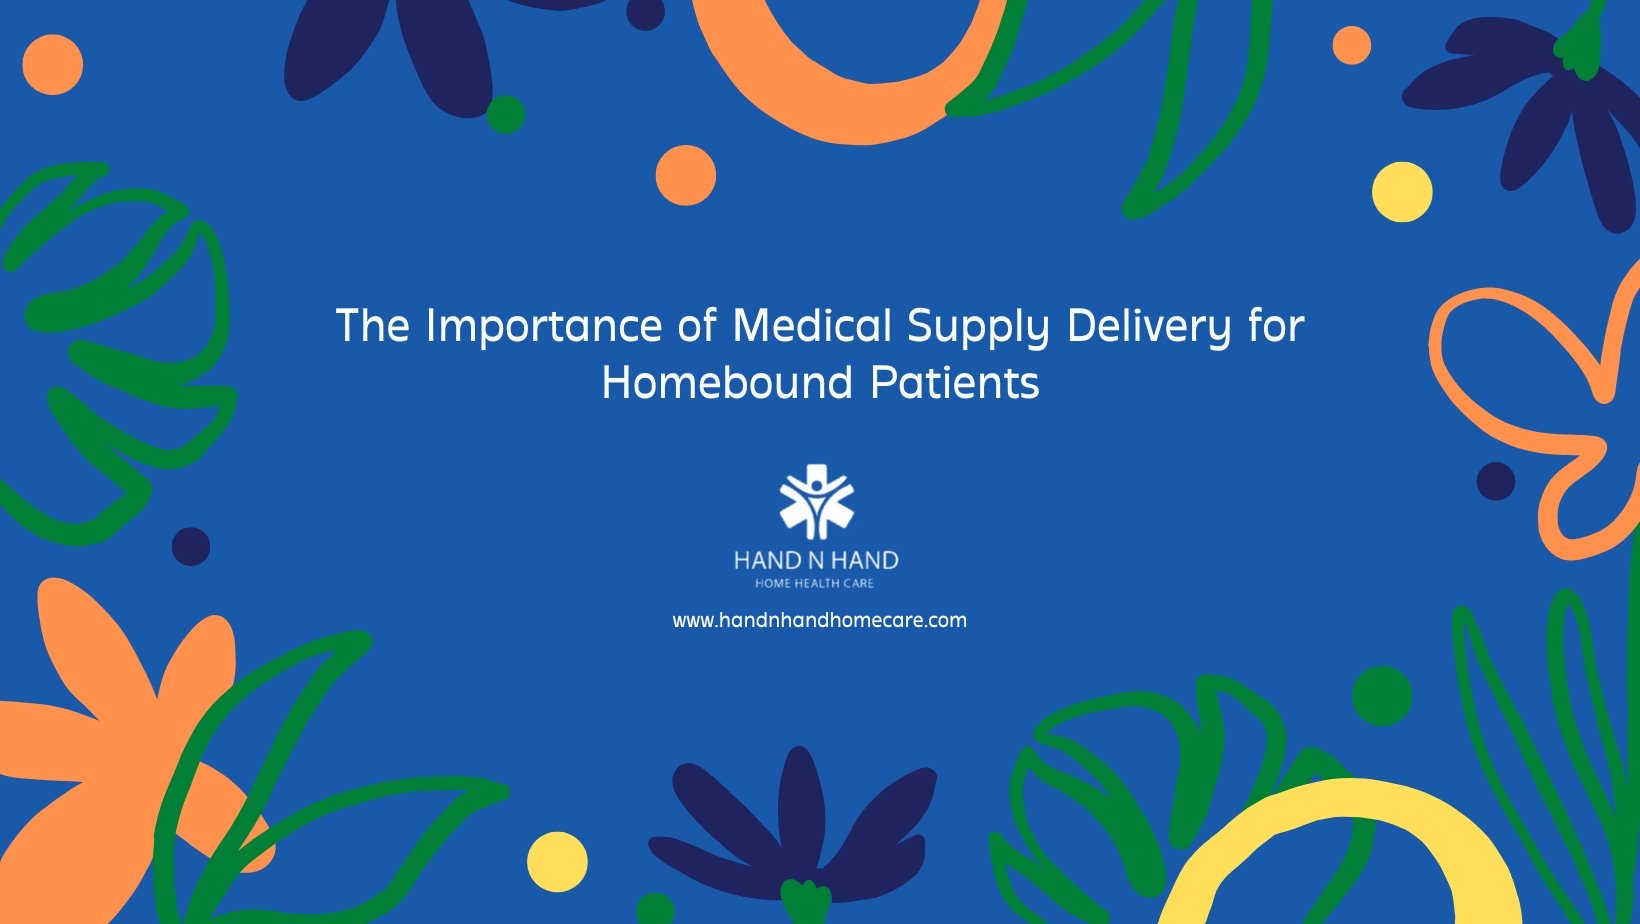 The Importance of Medical Supply Delivery for Homebound Patients